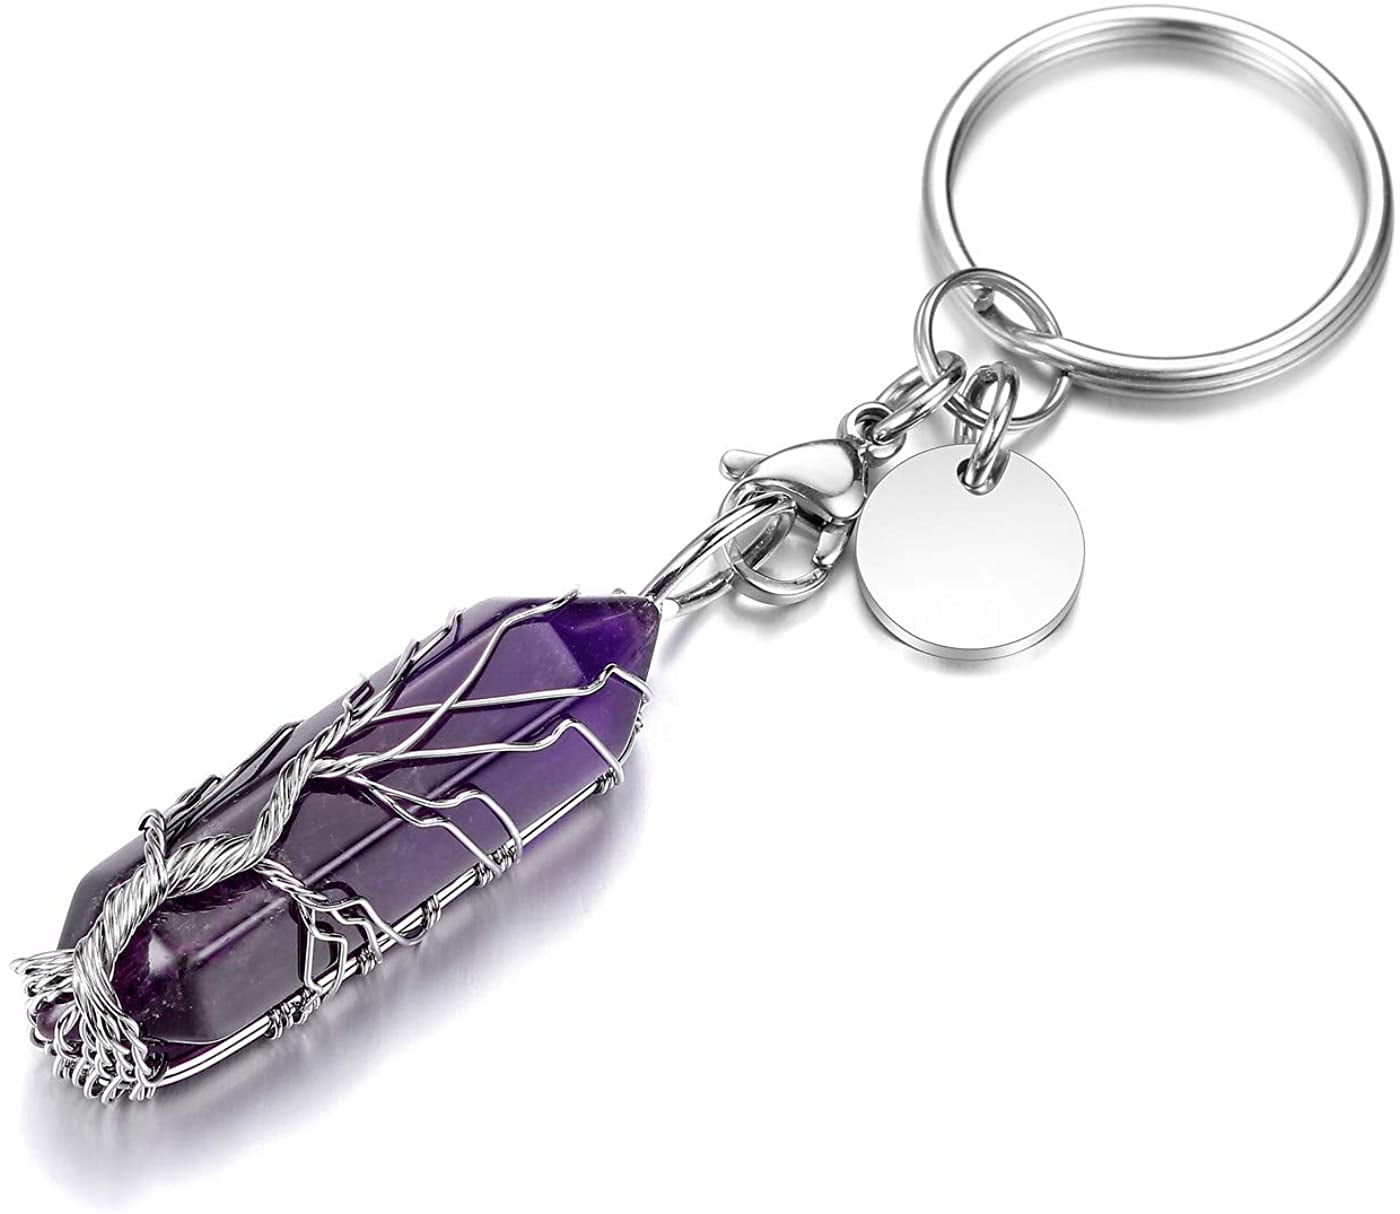 GEMSTONE CRYSTAL HEALING KEYRING PET CHARM FOR CATS & DOGS 